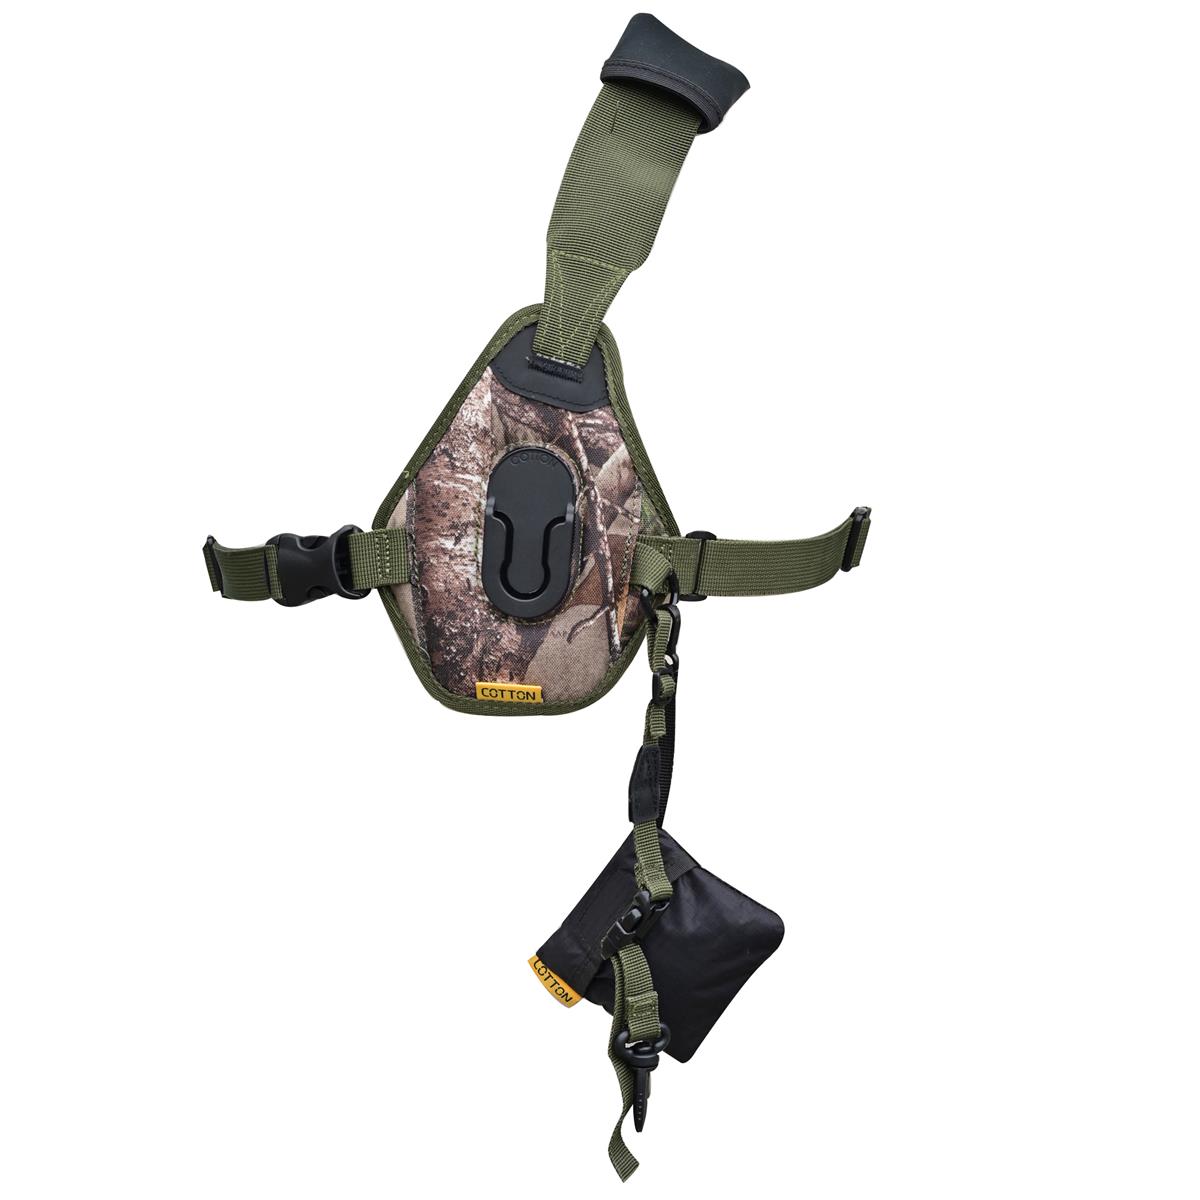 Image of Cotton Carrier SKOUT G2 Sling-Style Harness for Camera